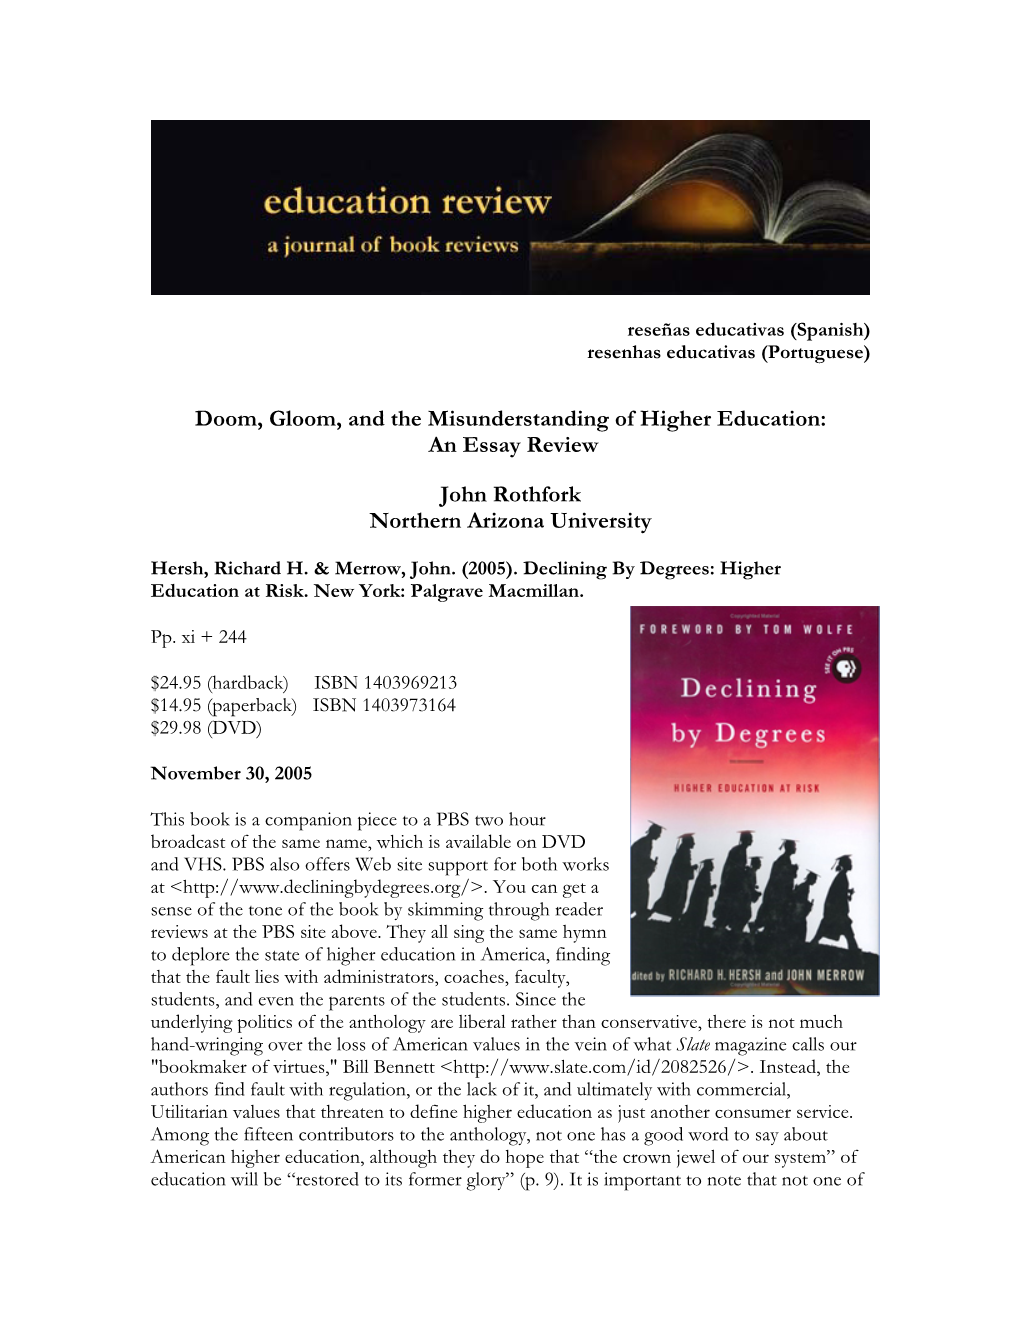 Doom, Gloom, and the Misunderstanding of Higher Education: an Essay Review